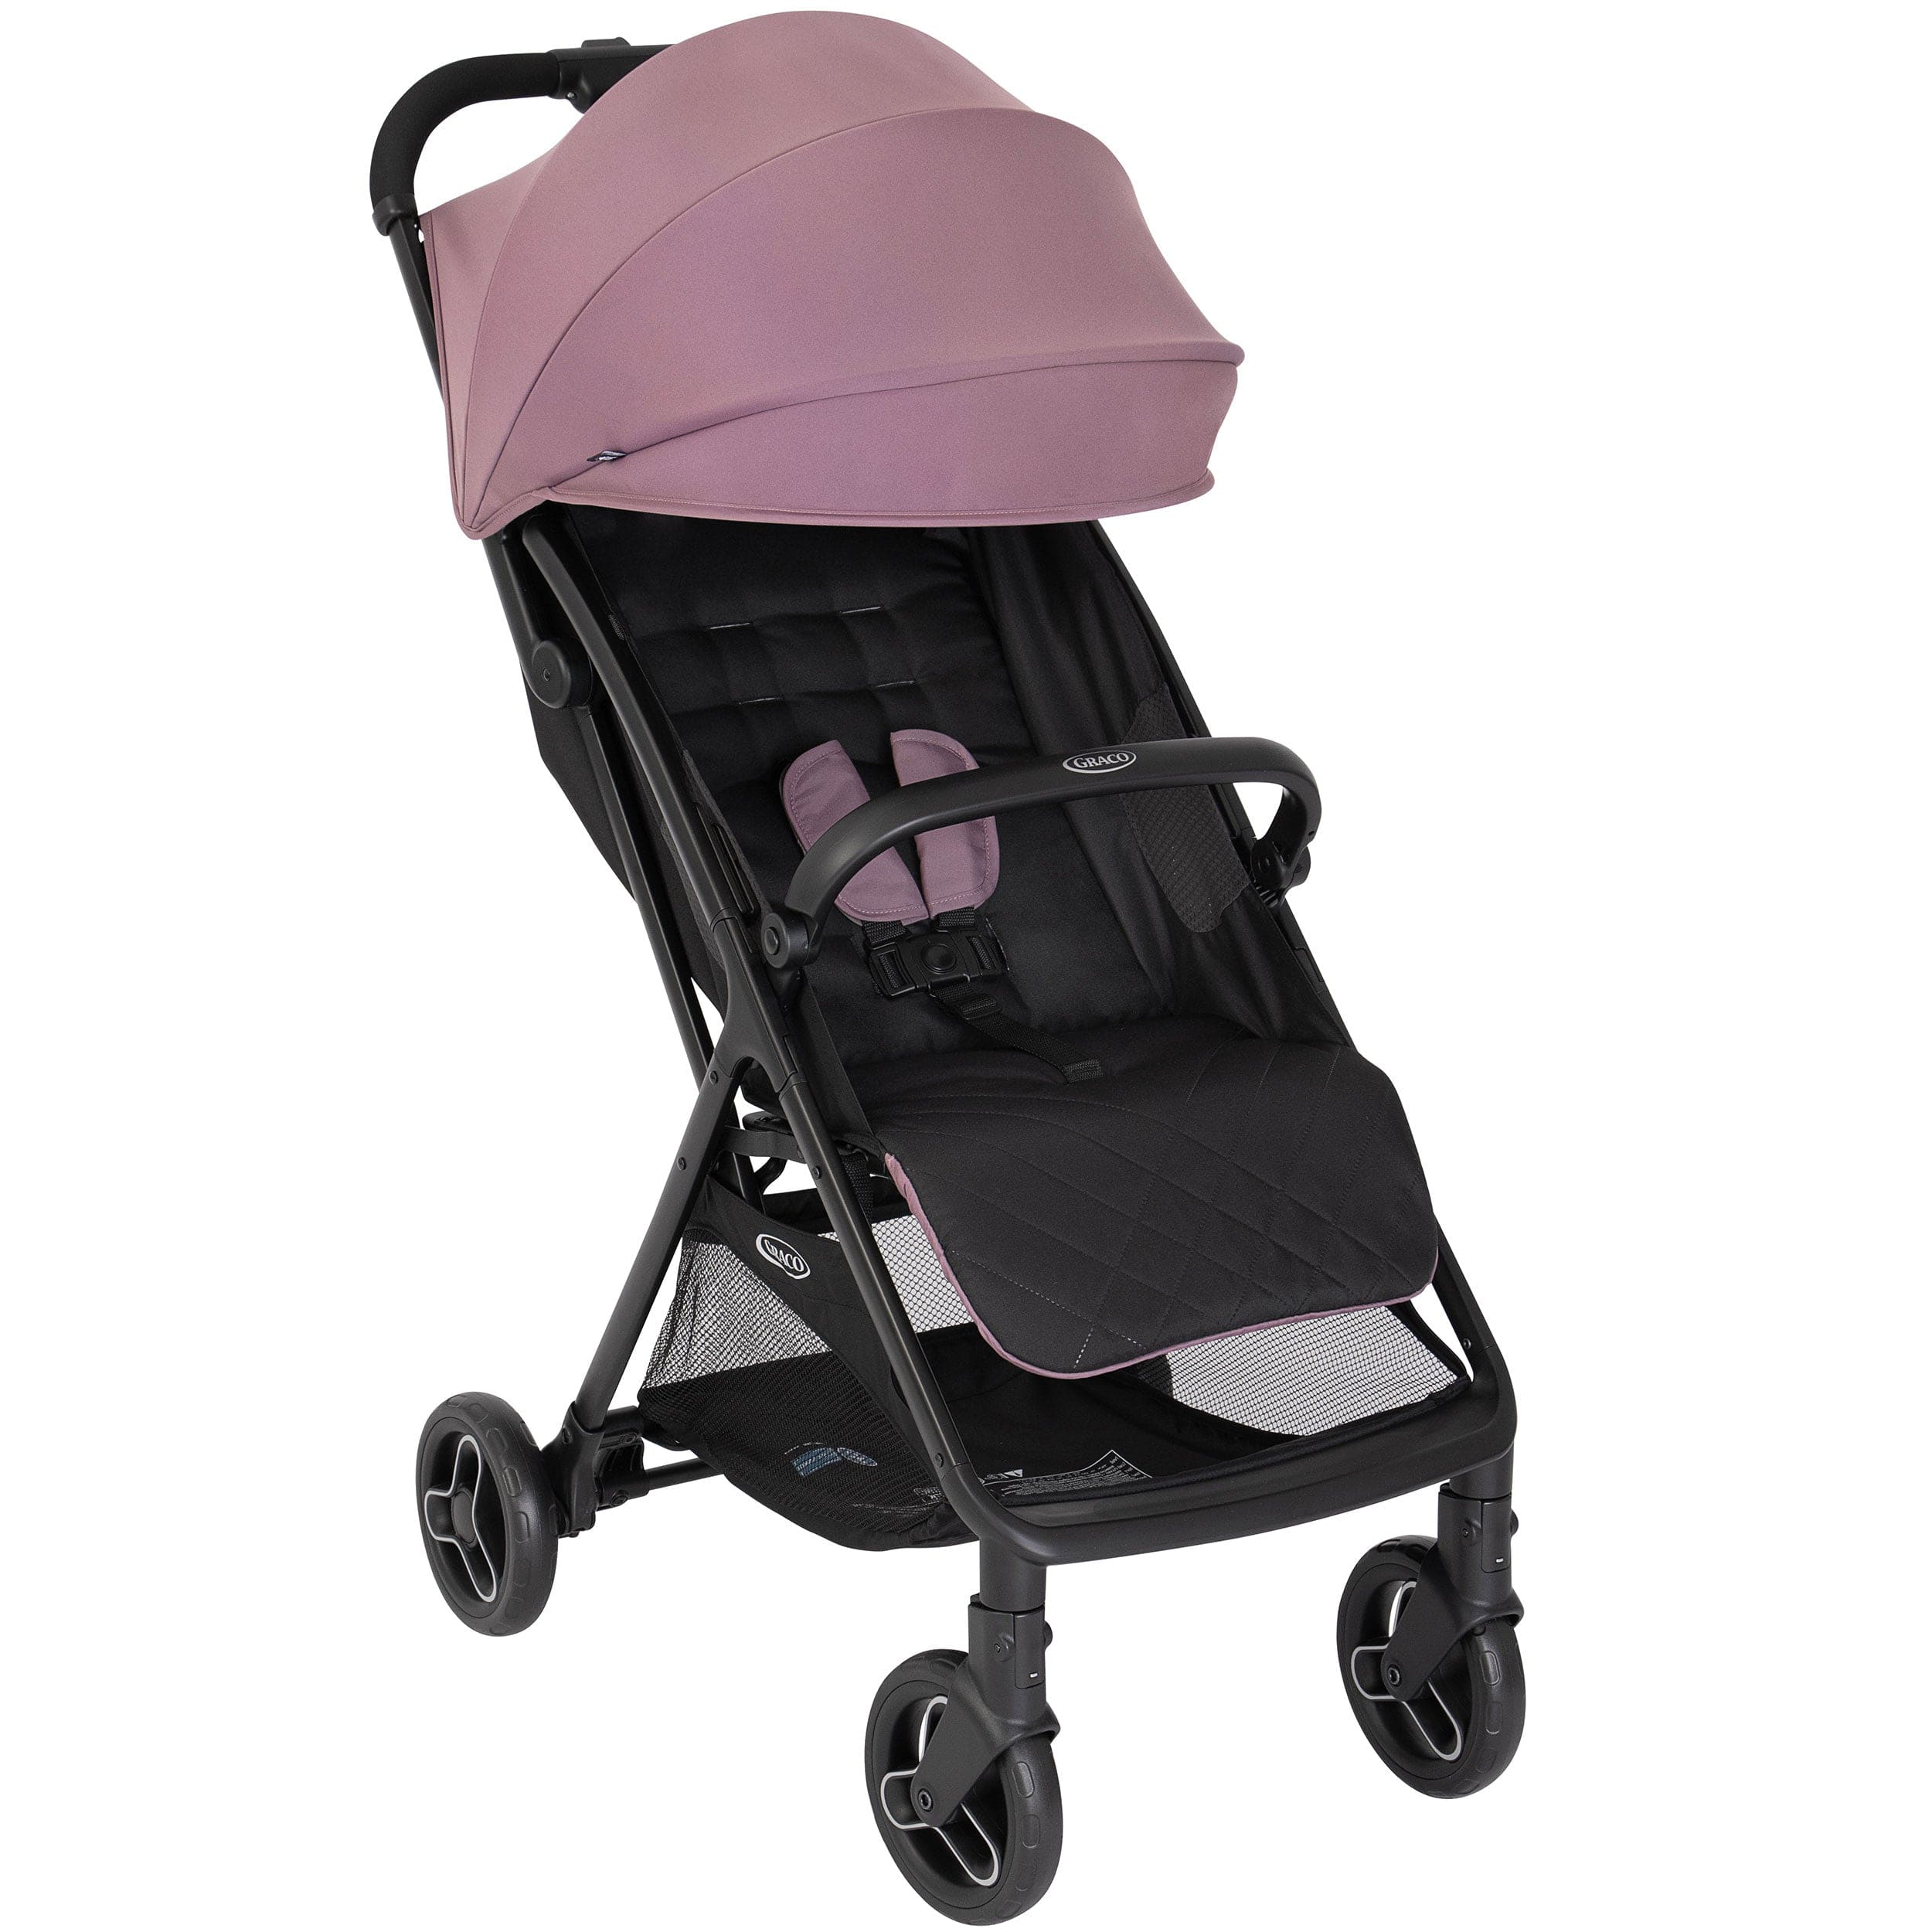 Graco Myavo Stroller in Mulberry Pushchairs & Buggies GS2107AAMBE000 5060624773662